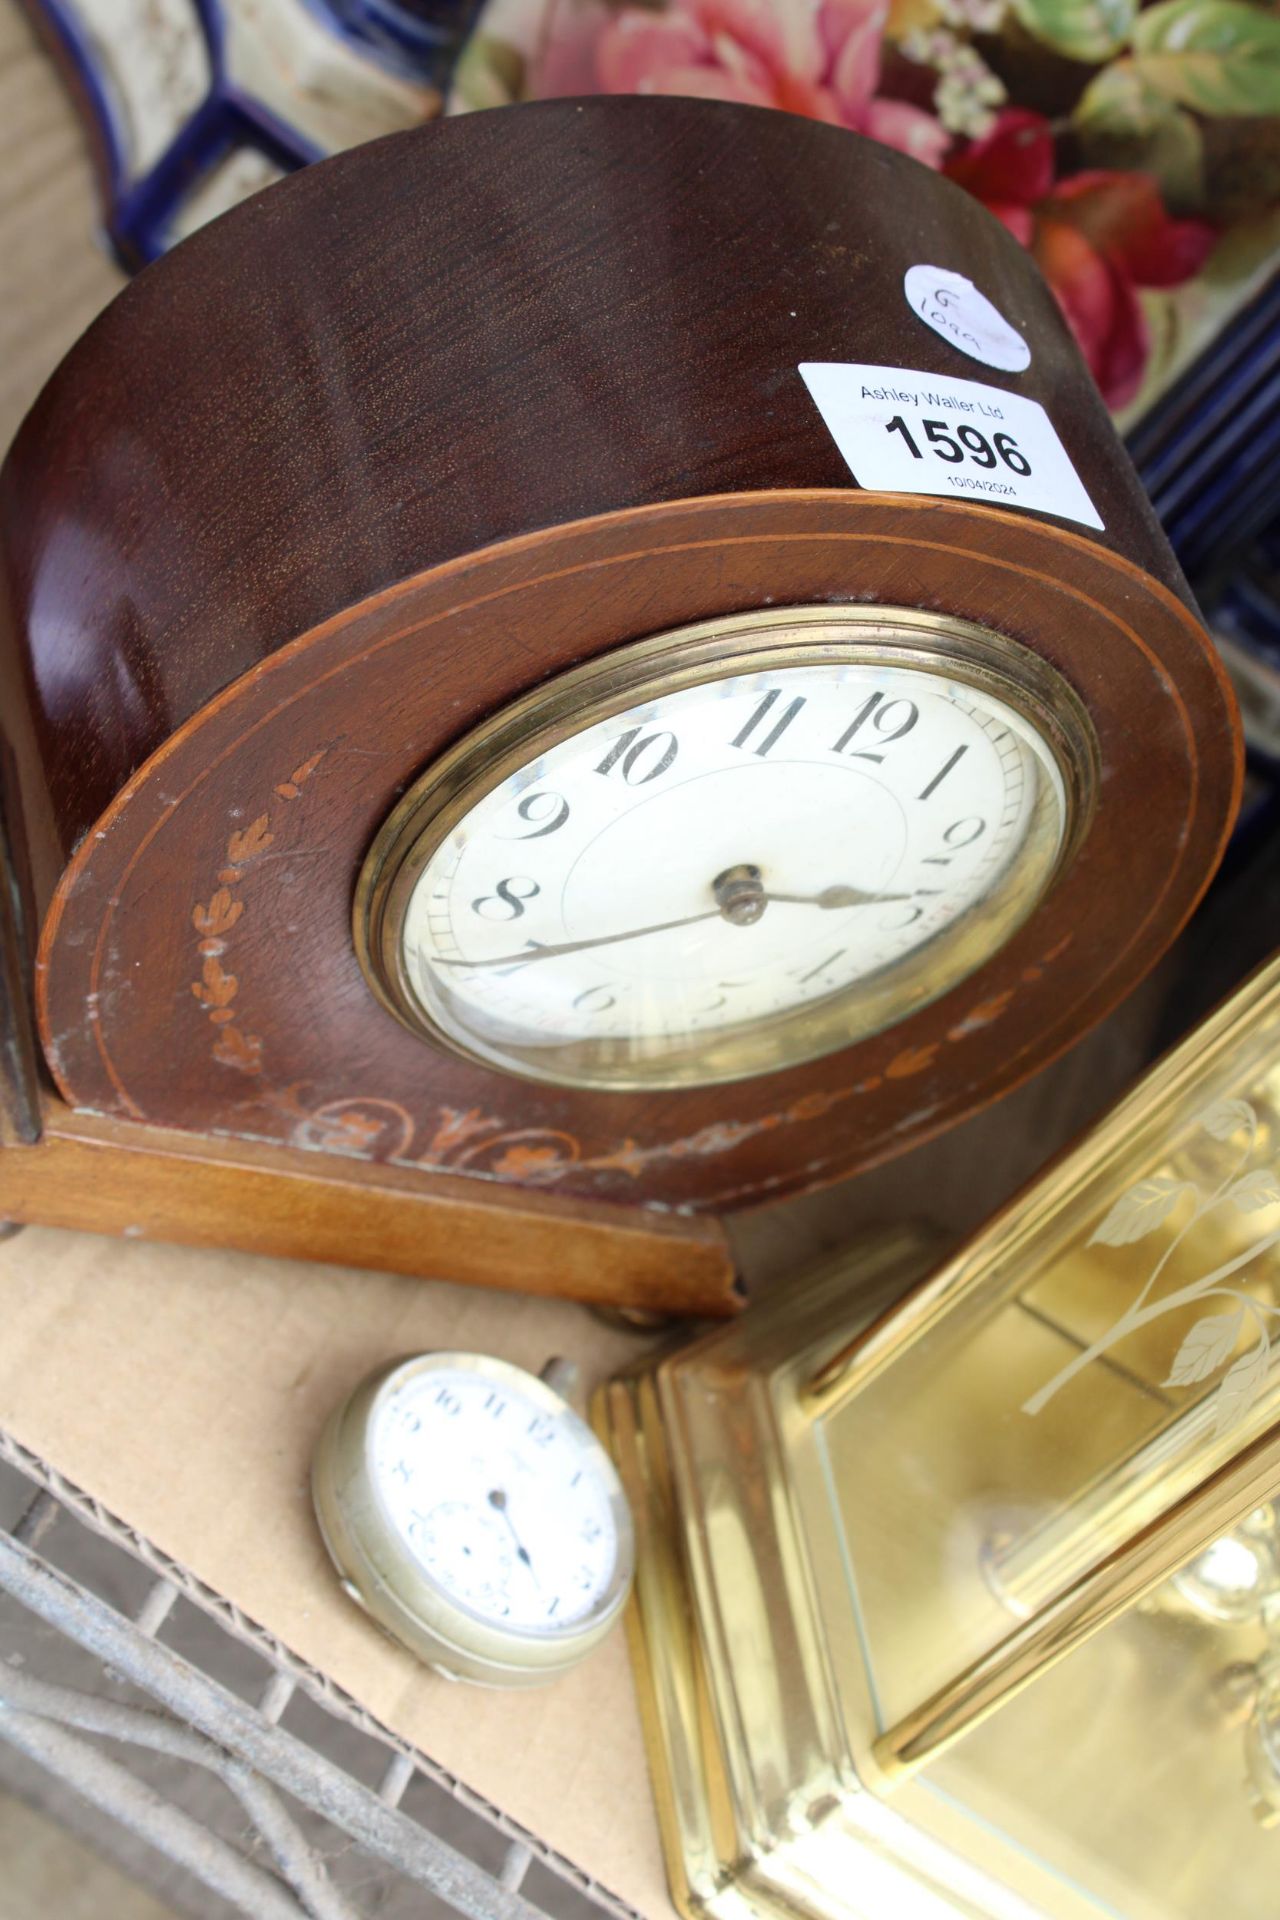 AN ASSORTMENT OF VINTAGE CLOCKS TO INCLUDE A CERAMIC MANTLE CLOCK, AN ANIVERSARY CLOCK AND A - Image 4 of 6